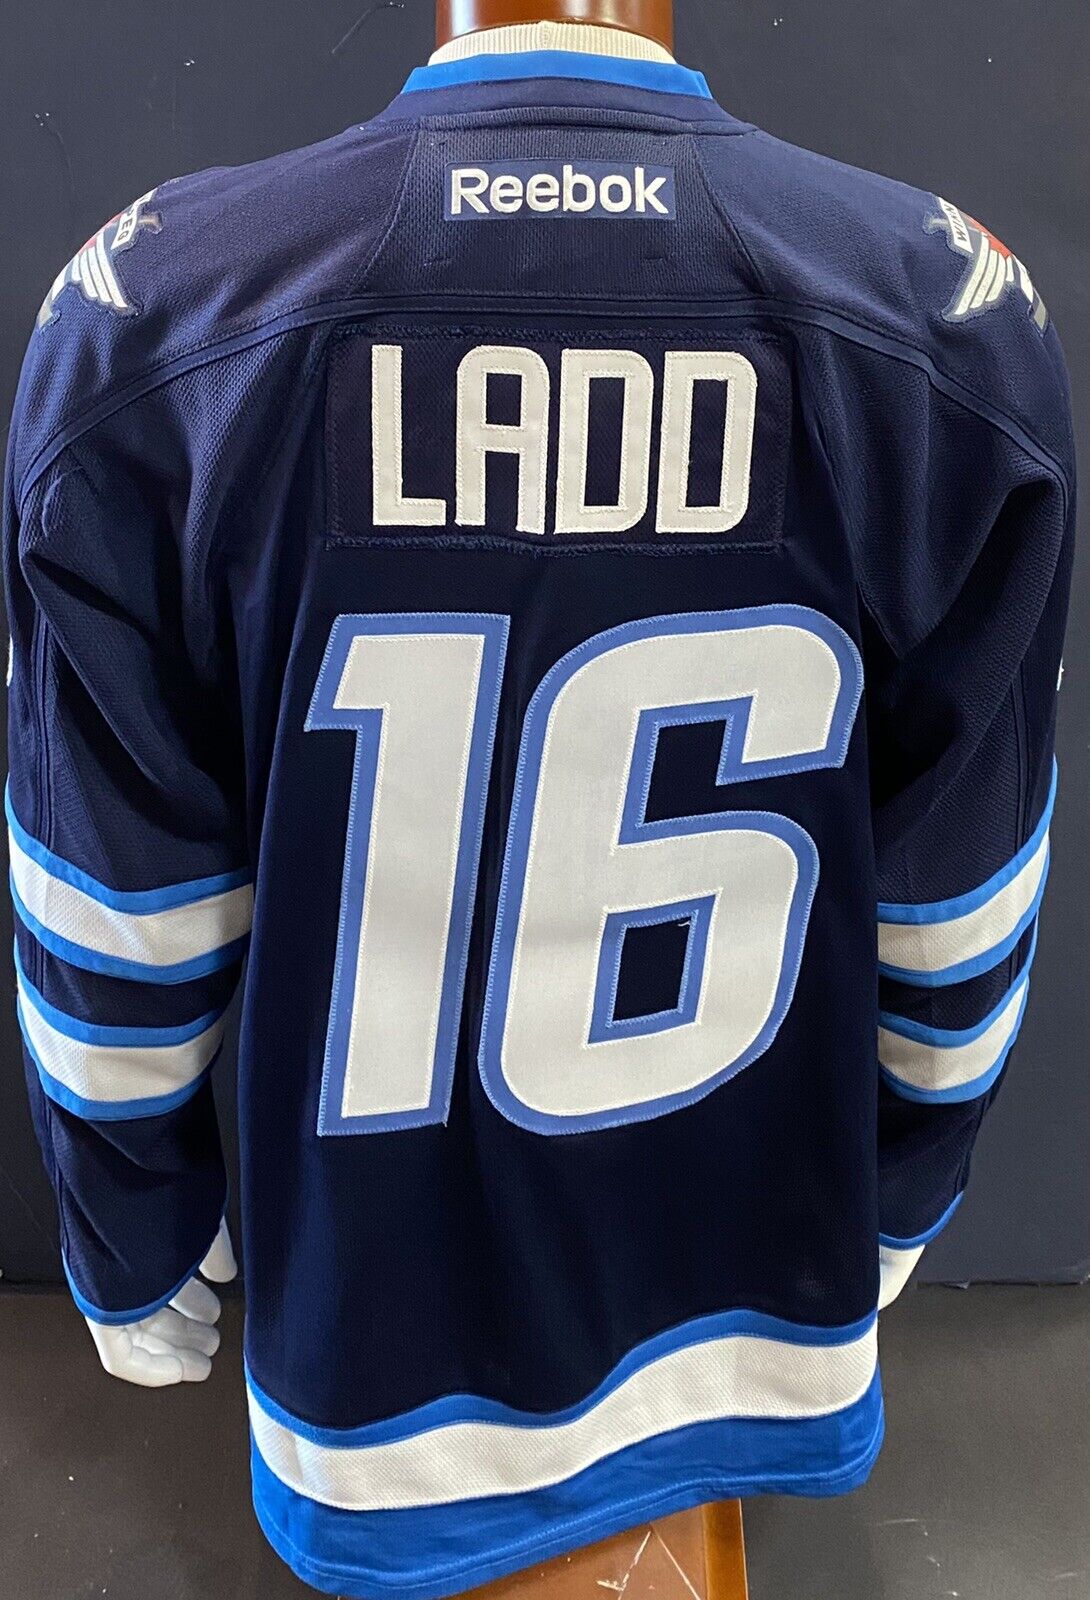 Andrew Ladd Authentic Reebok Winnipeg Jets Blue Jersey NHL Official Stitched L